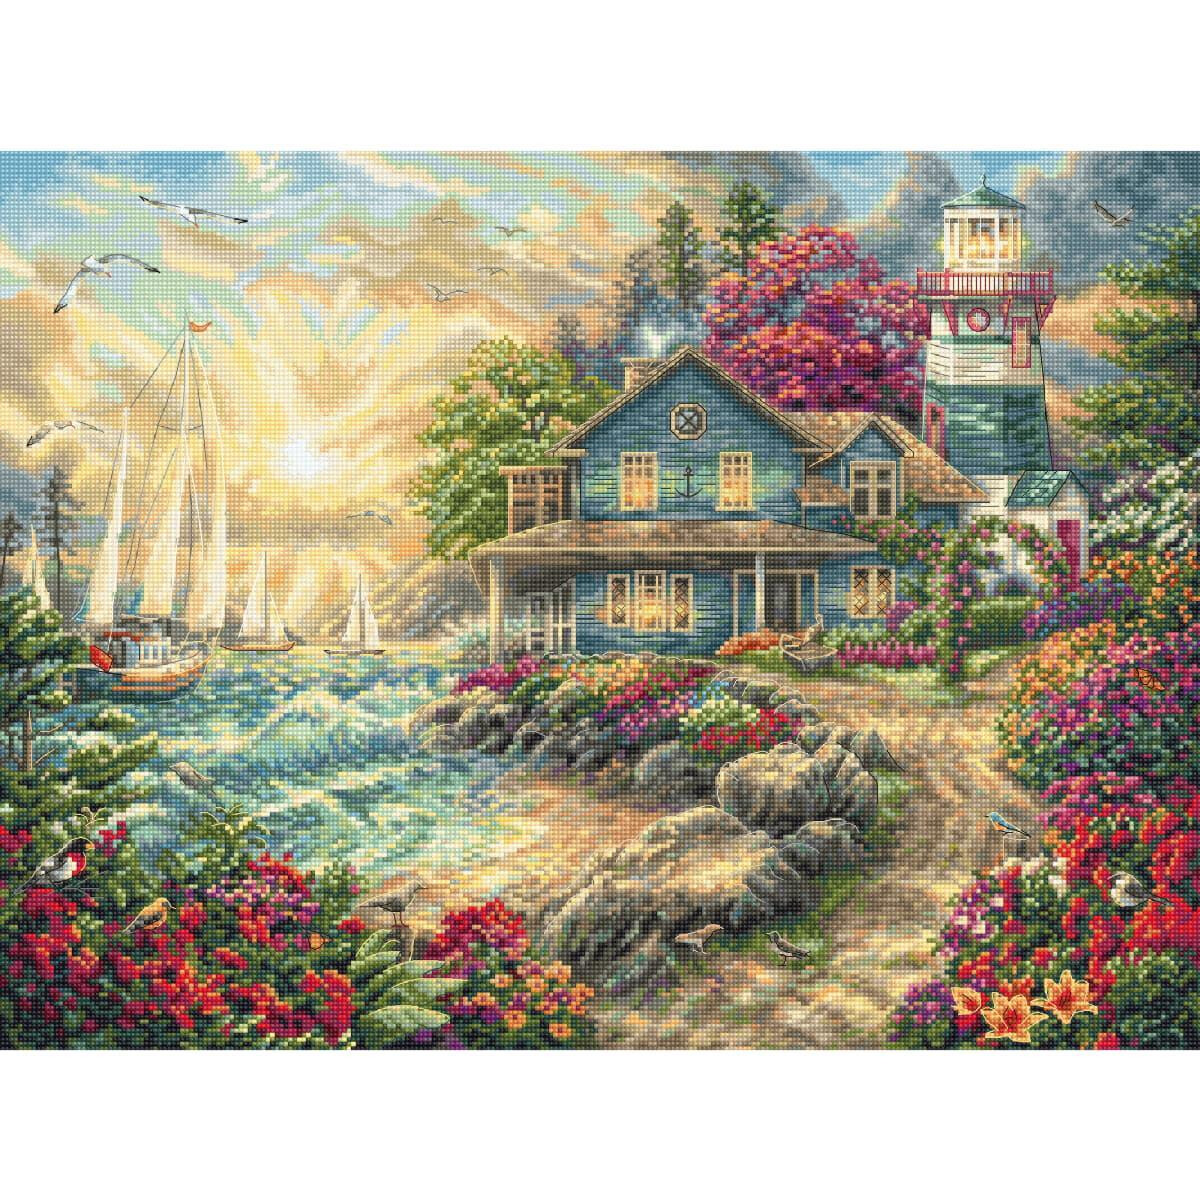 Letistitch counted cross stitch kit "Sunrise by the...